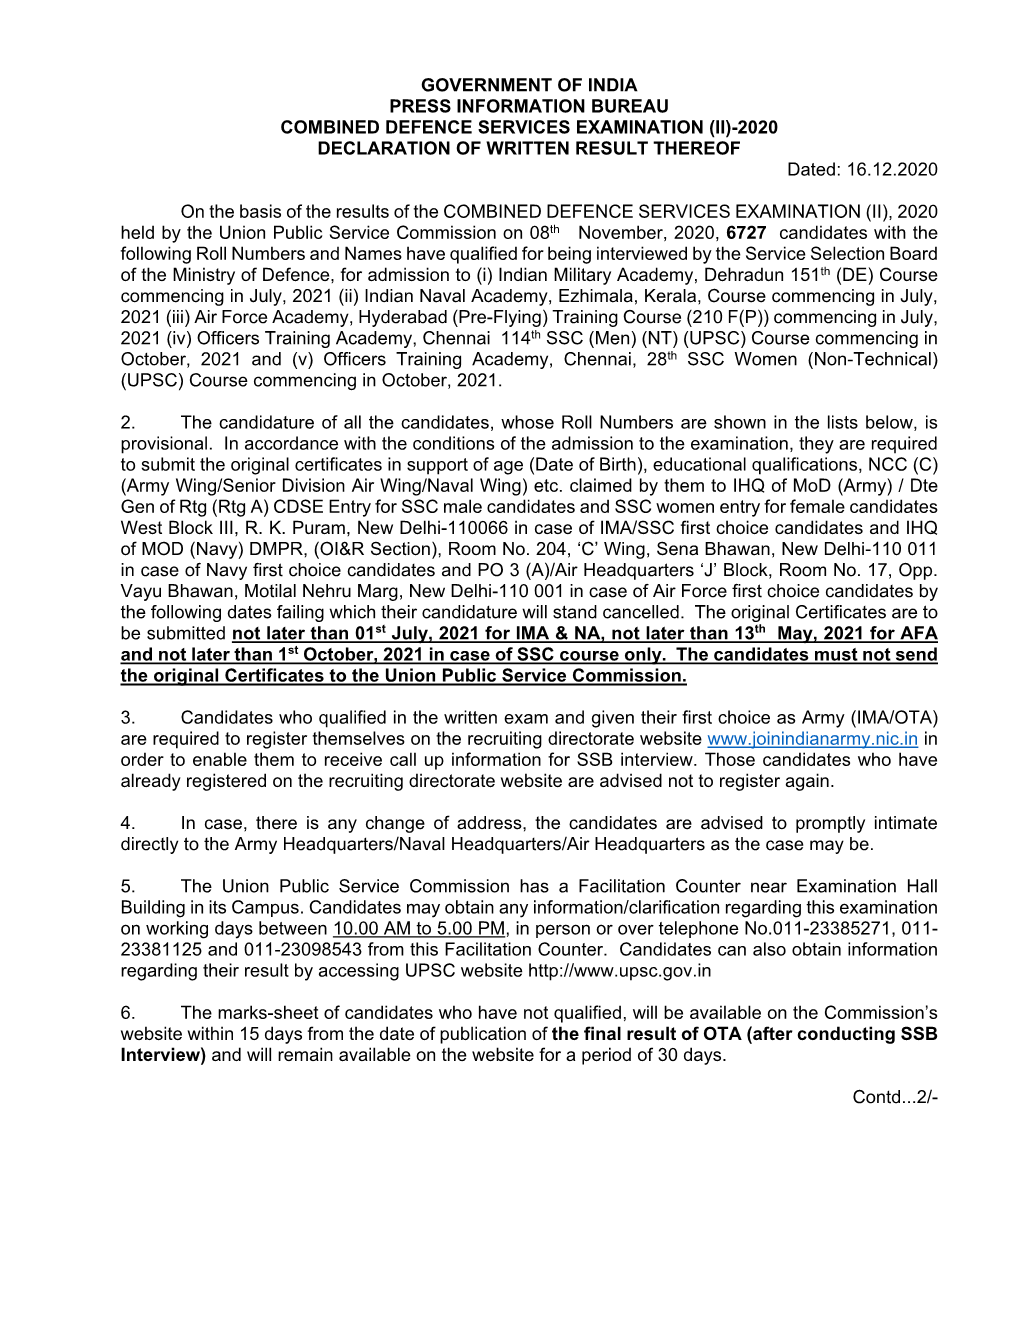 GOVERNMENT of INDIA PRESS INFORMATION BUREAU COMBINED DEFENCE SERVICES EXAMINATION (II)-2020 DECLARATION of WRITTEN RESULT THEREOF Dated: 16.12.2020